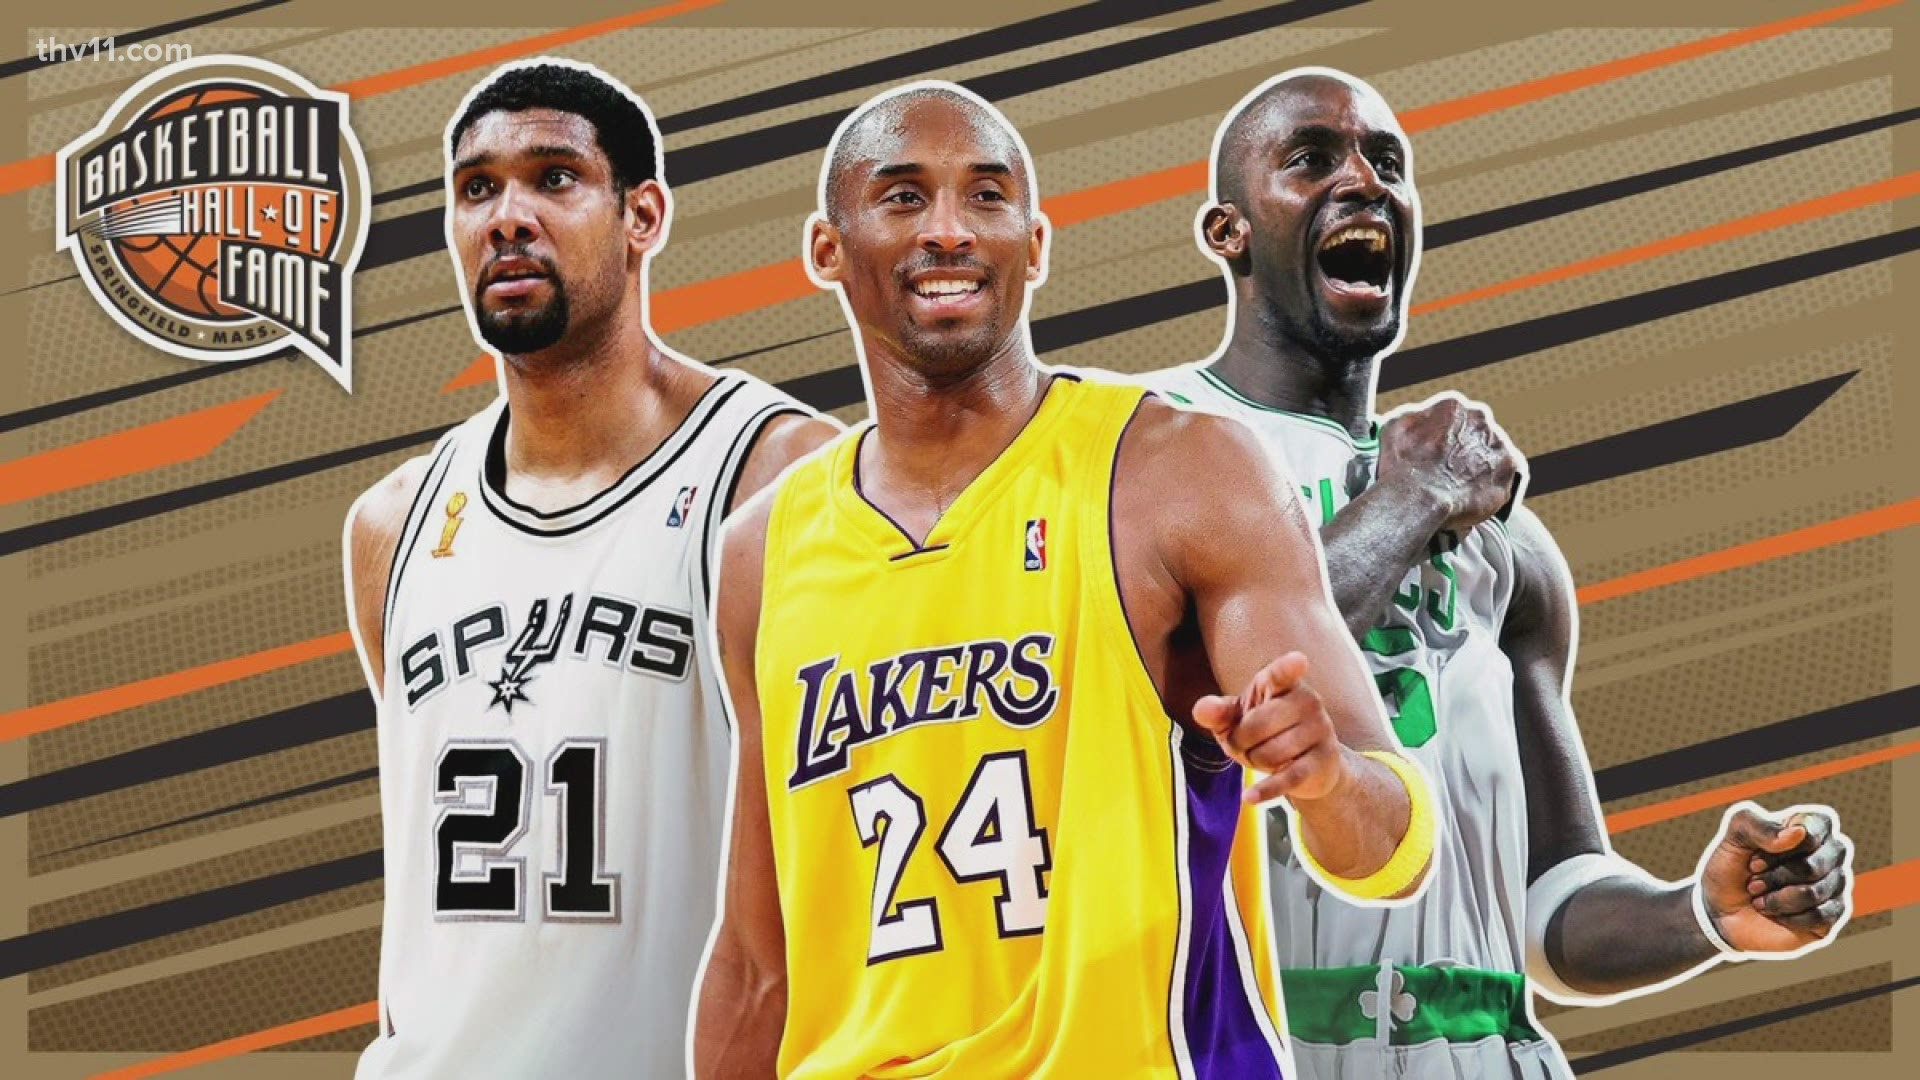 Three of basketball's greatest players will be inducted into the Basketball Hall of Fame and there's a controversial list making the rounds on social media.